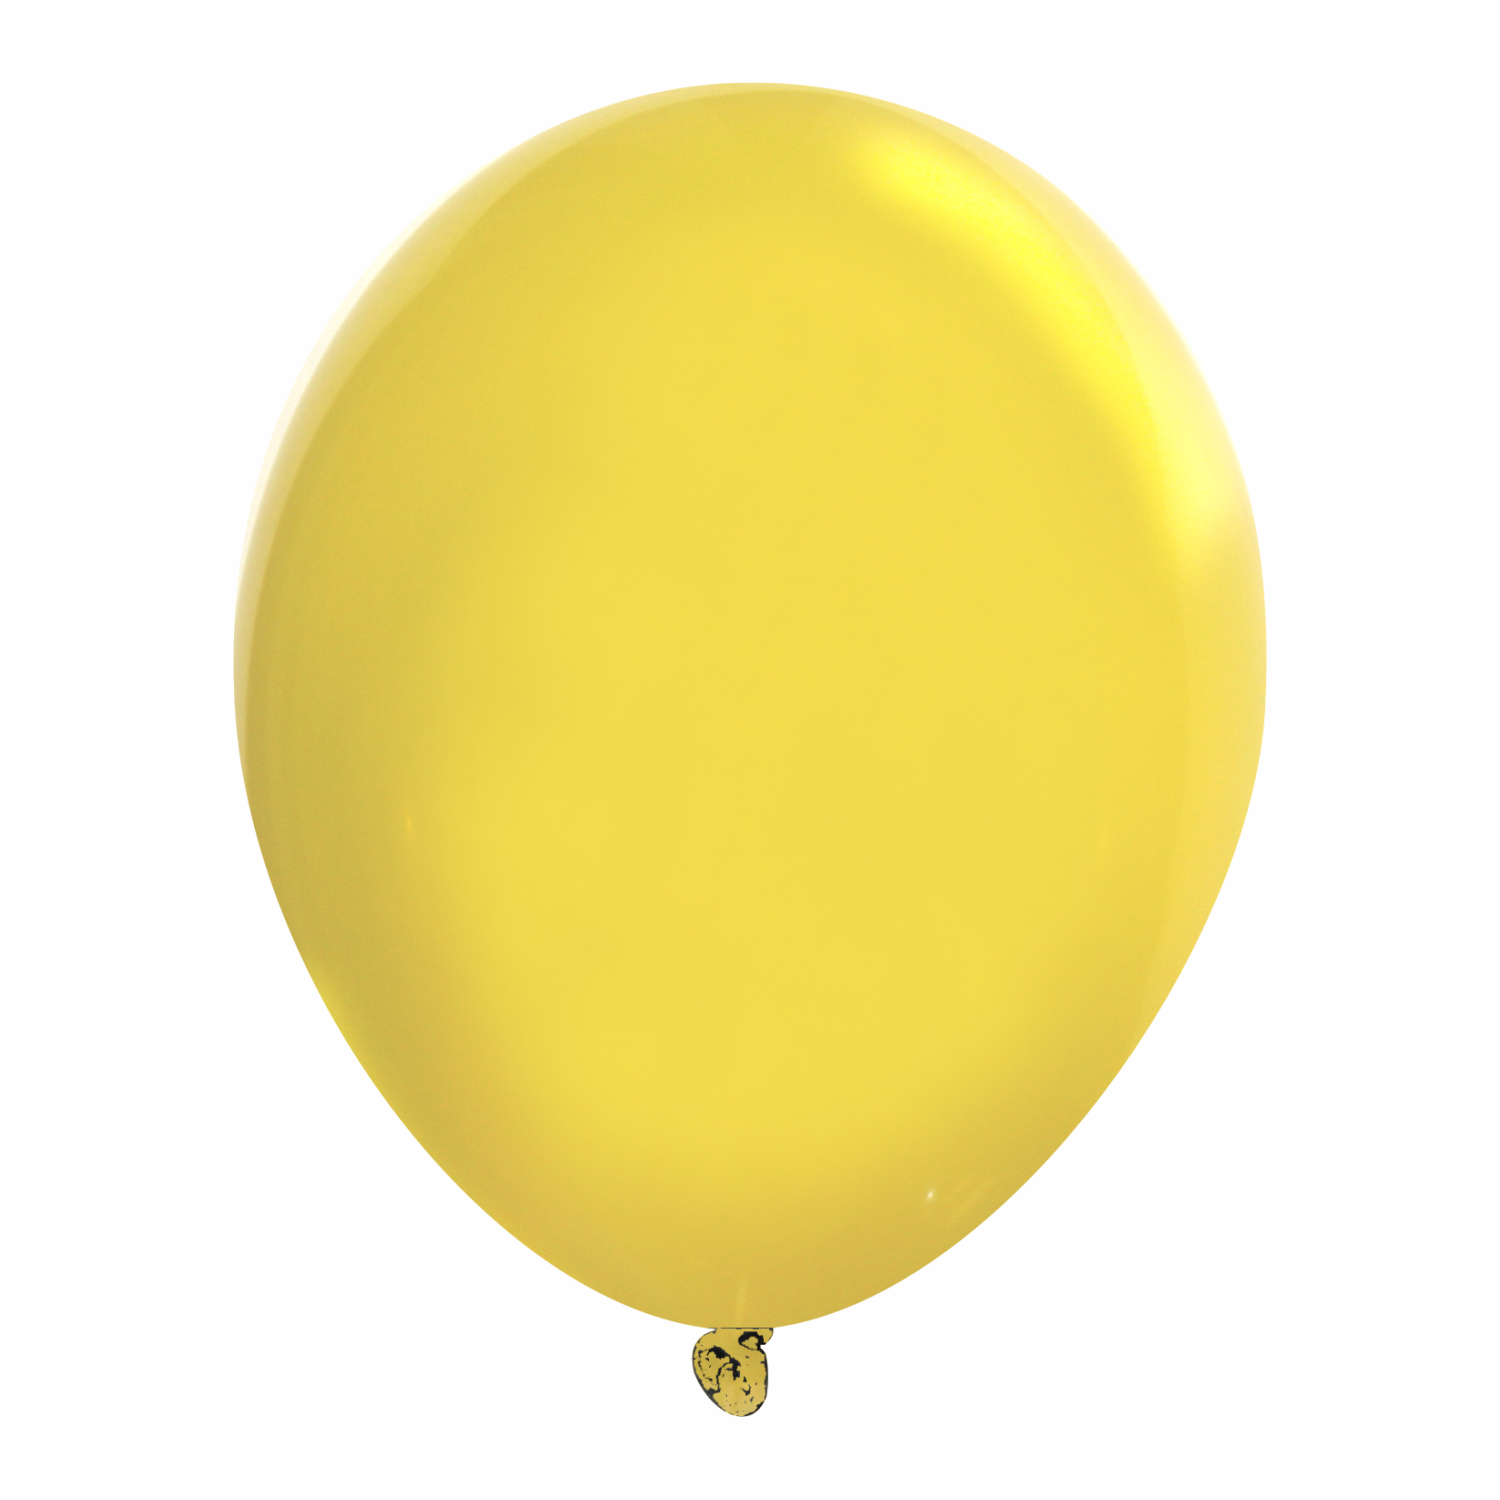 http://images.officebrain.com/migration-api-hidden-new/web/images/626/11wrp-cry-lemon-yellow.png